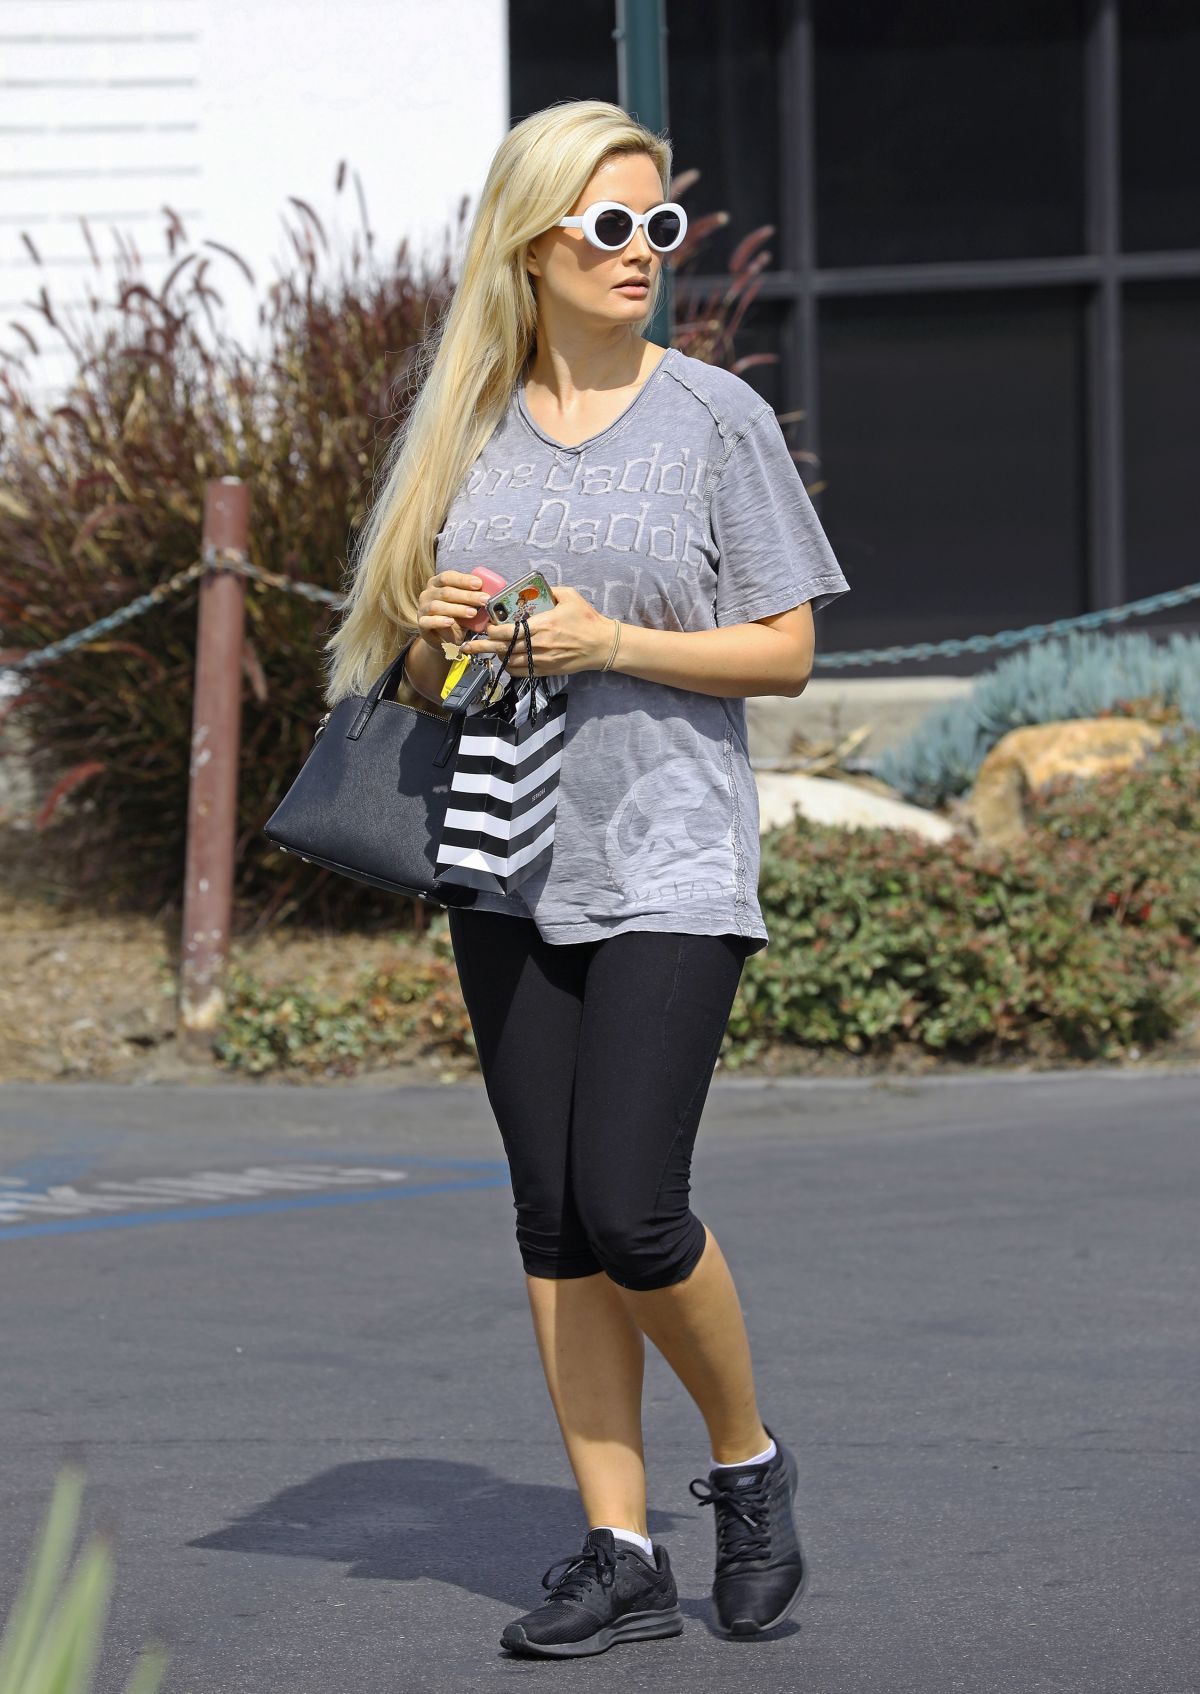 HOLLY MADISON in Leggings Out in Los Angeles 04/15/2019 – HawtCelebs